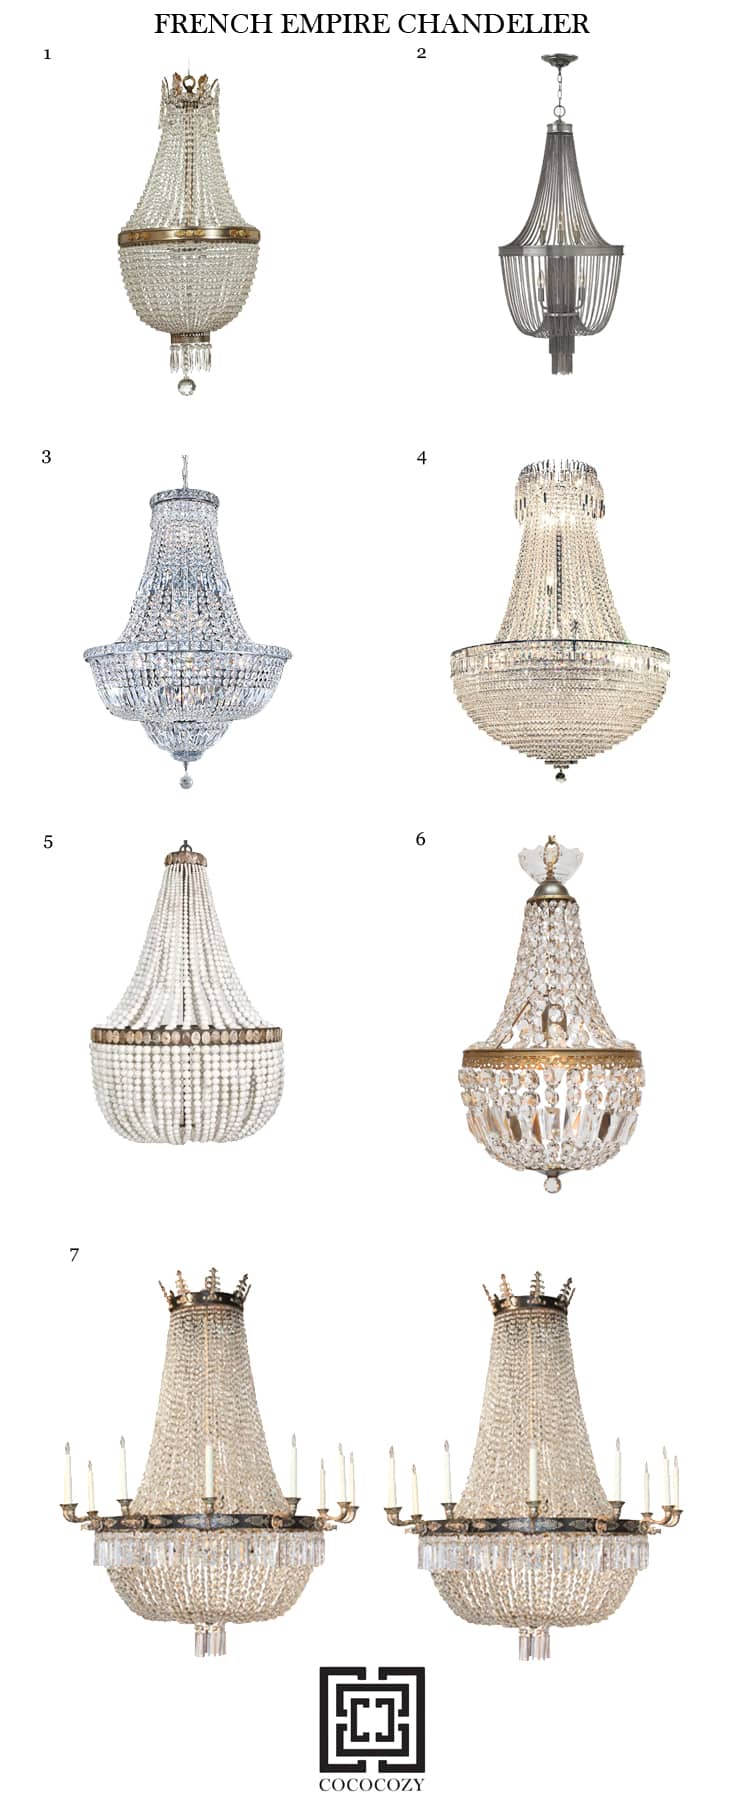 French empire chandelier